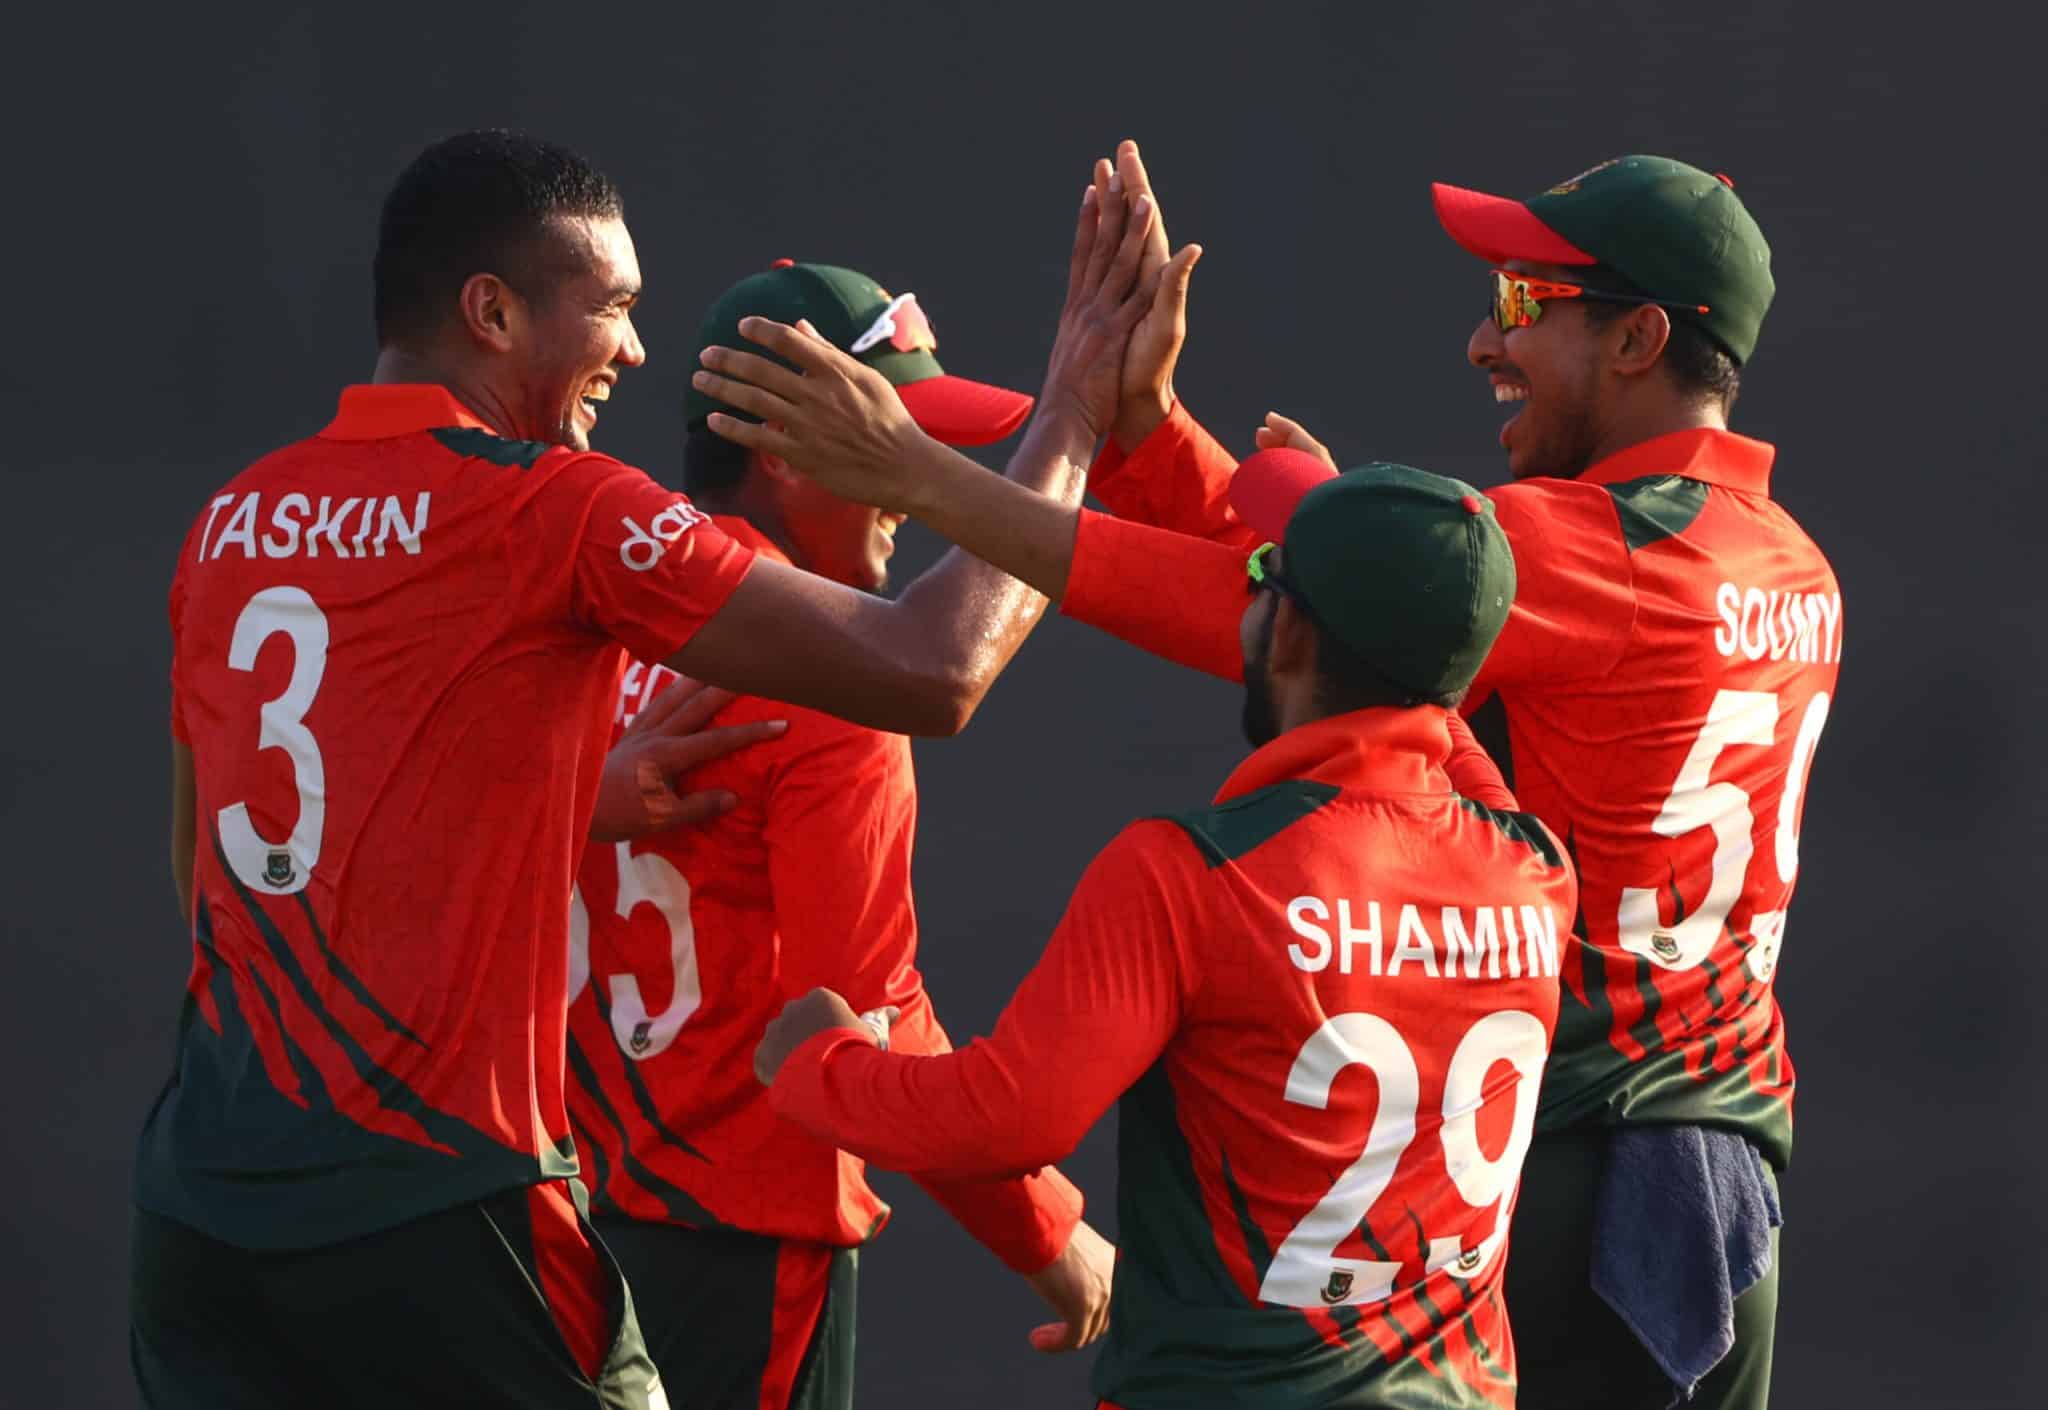 Final Squad announced: Bangladesh to begin the T20 world cup journey soon